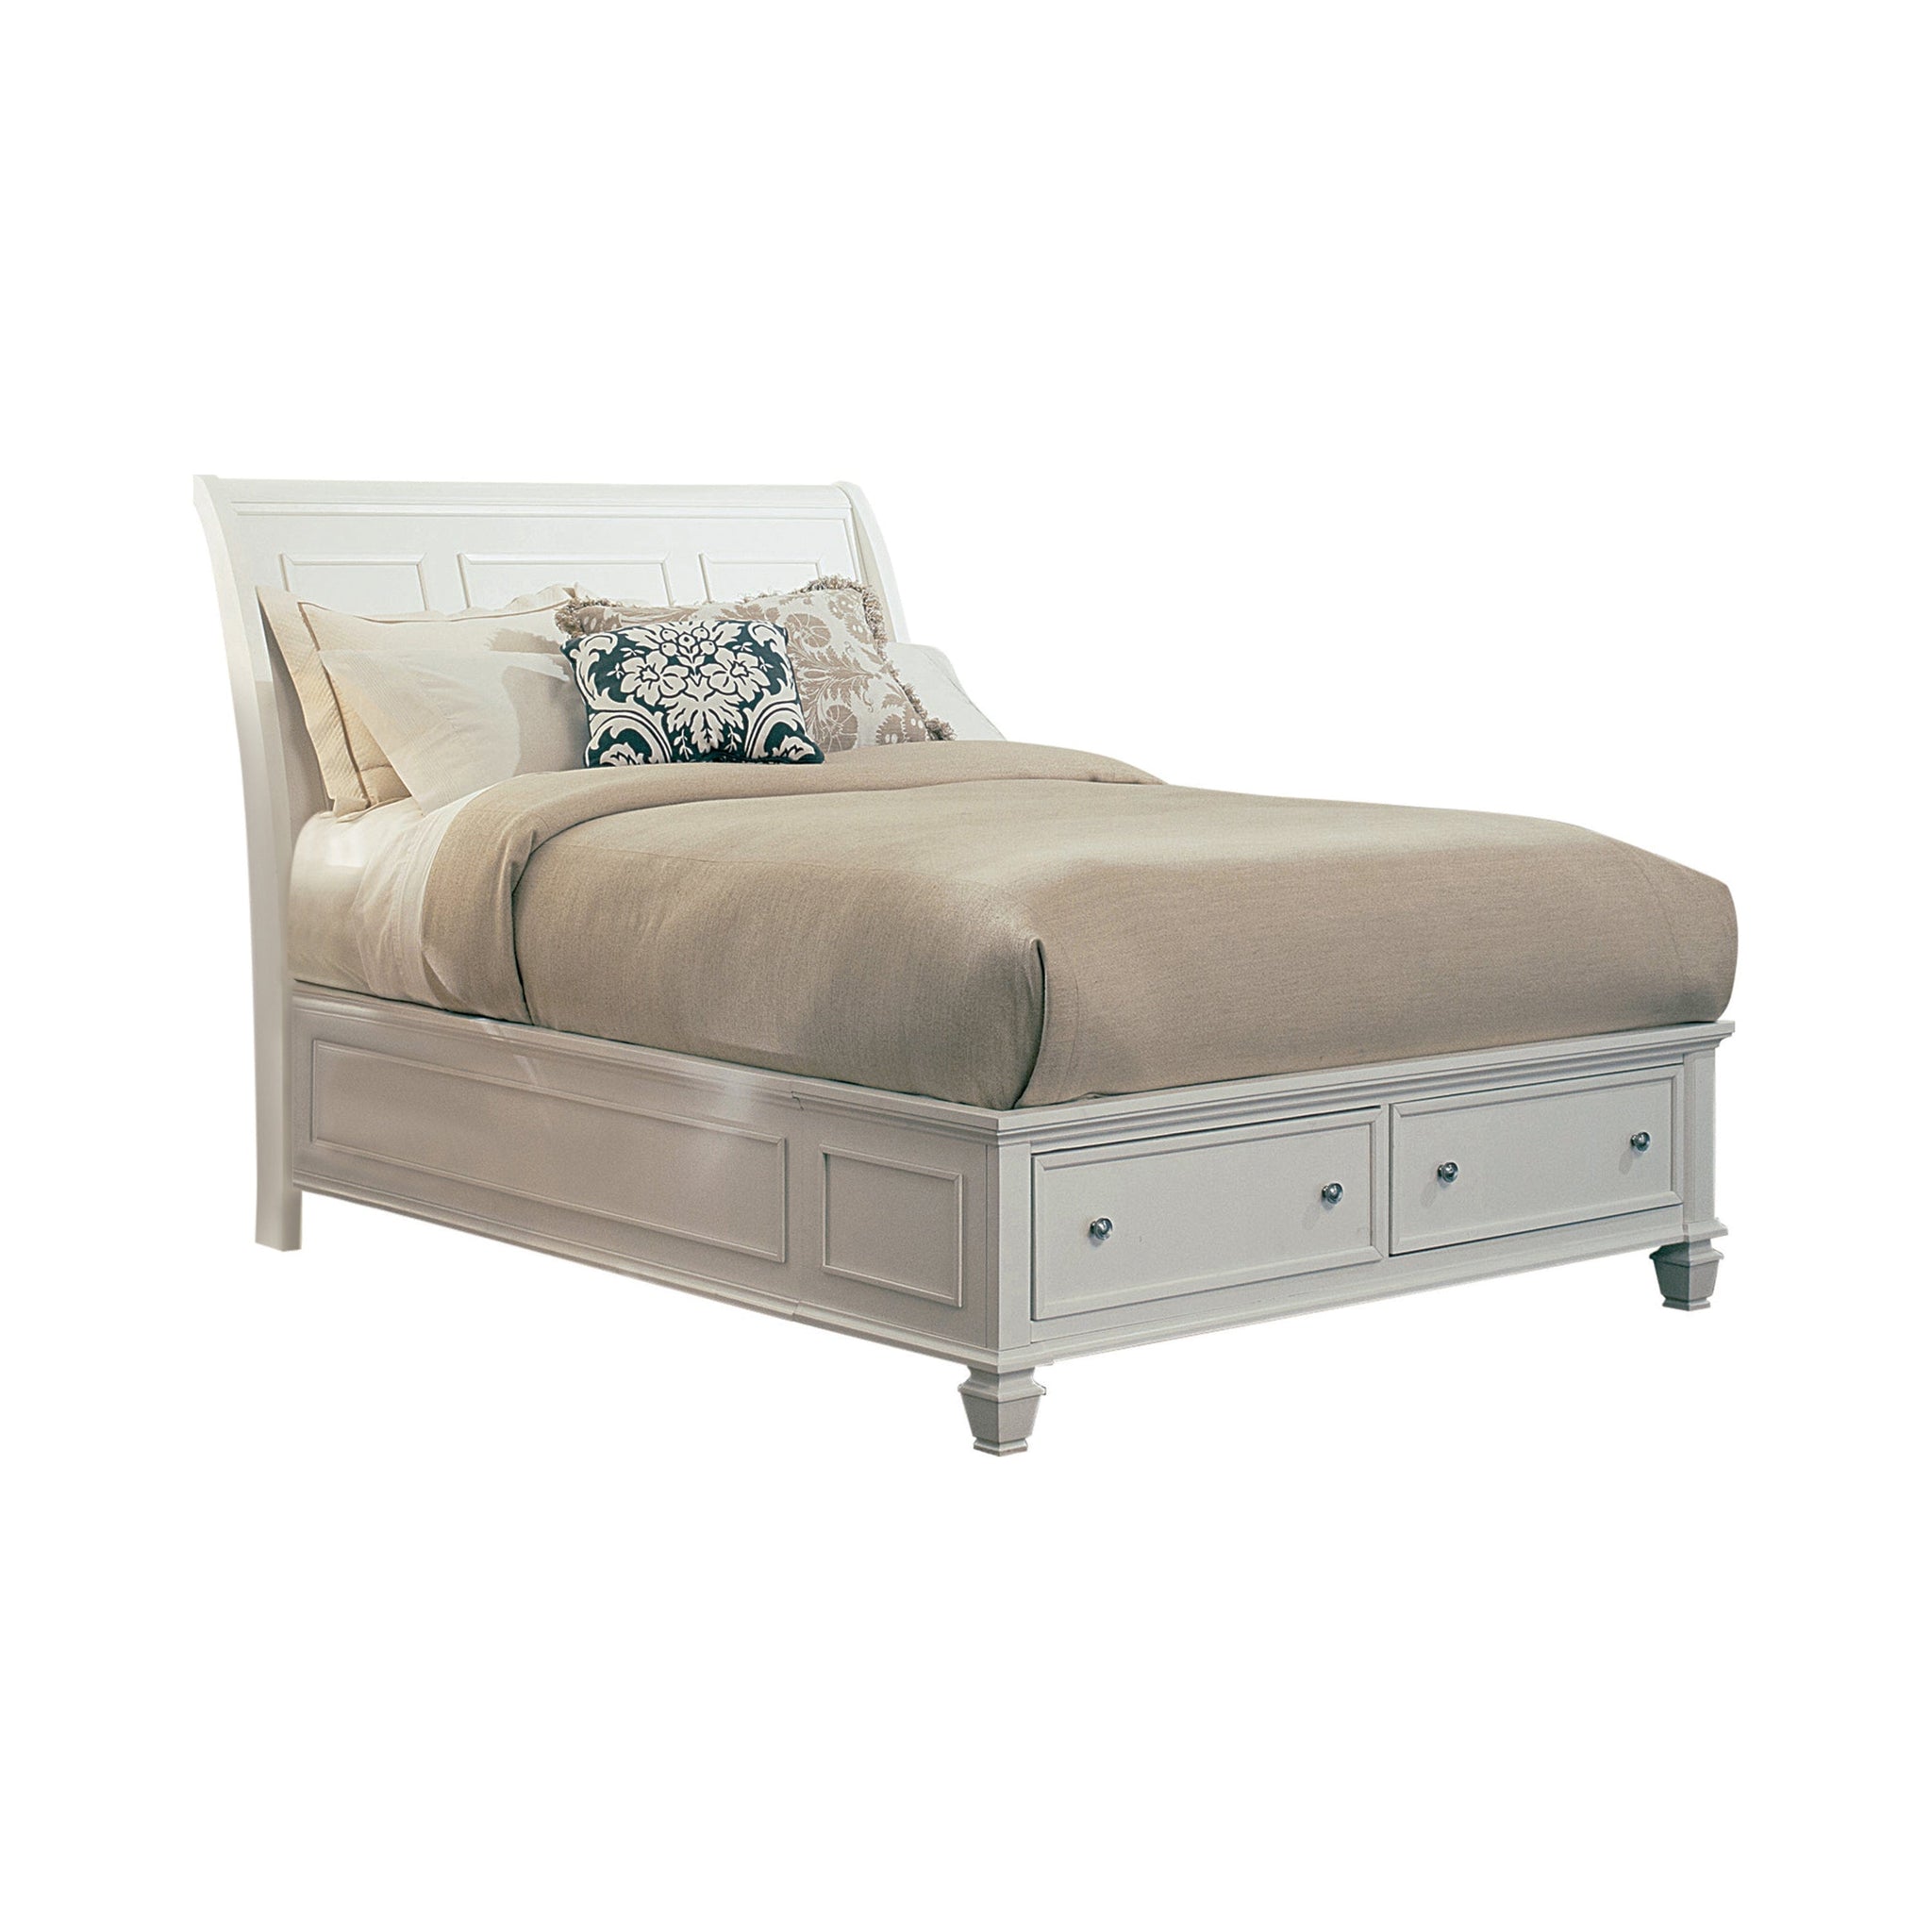 Sandy Beach Eastern King Storage Sleigh Bed White Collection: This Bed Is Constructed From Tropical Hardwoods And Veneer For Dependability And Durability, Also A Classy White Finish, Can Be Showcased In Any Master Bedroom.  SKU: 201309KE